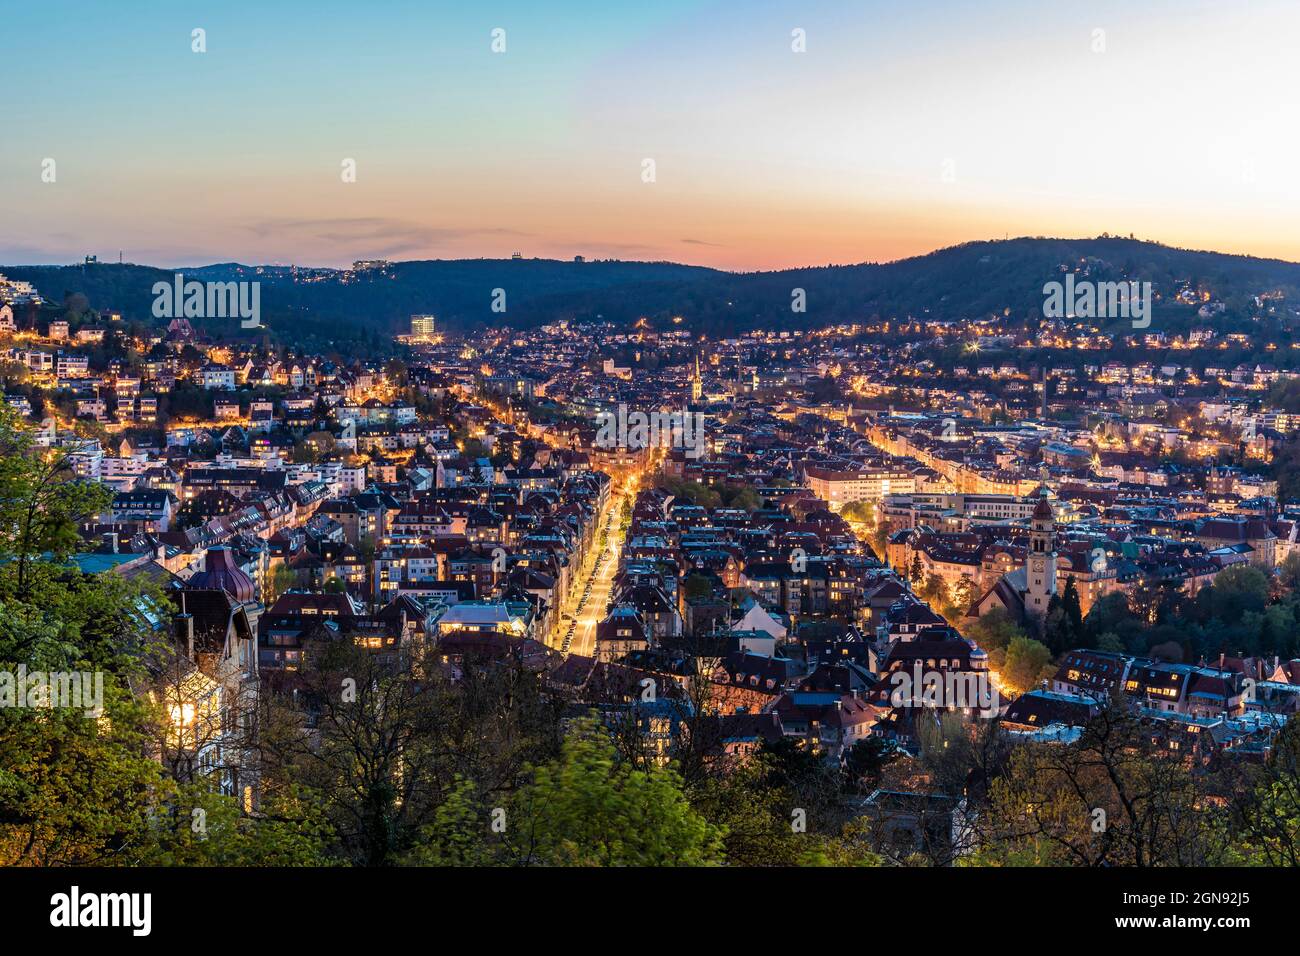 Germany, Baden-Wurttemberg, Stuttgart, Heslach and Lehen districts seen from Weissenburgpark at dusk Stock Photo